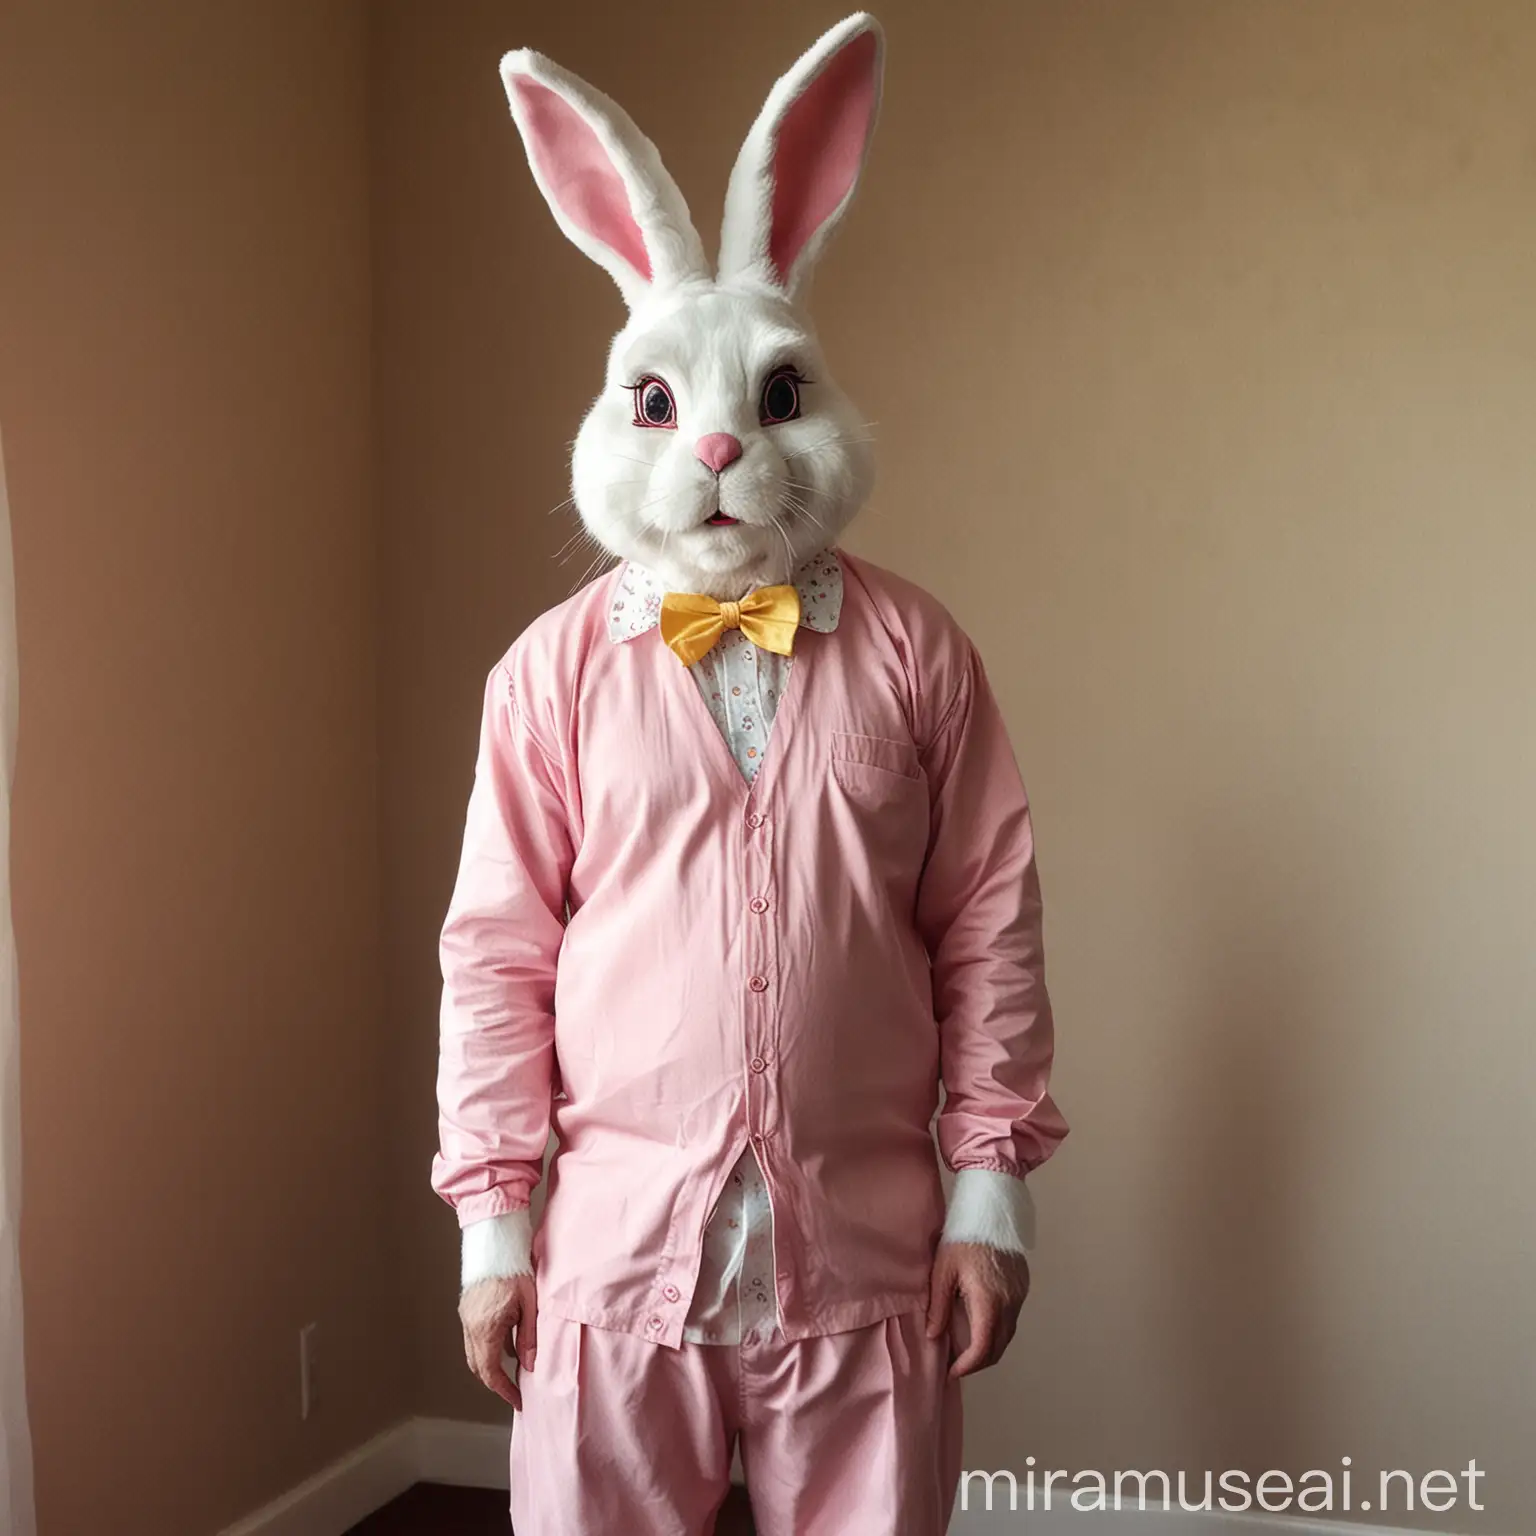 The easter bunny looking like a normal human